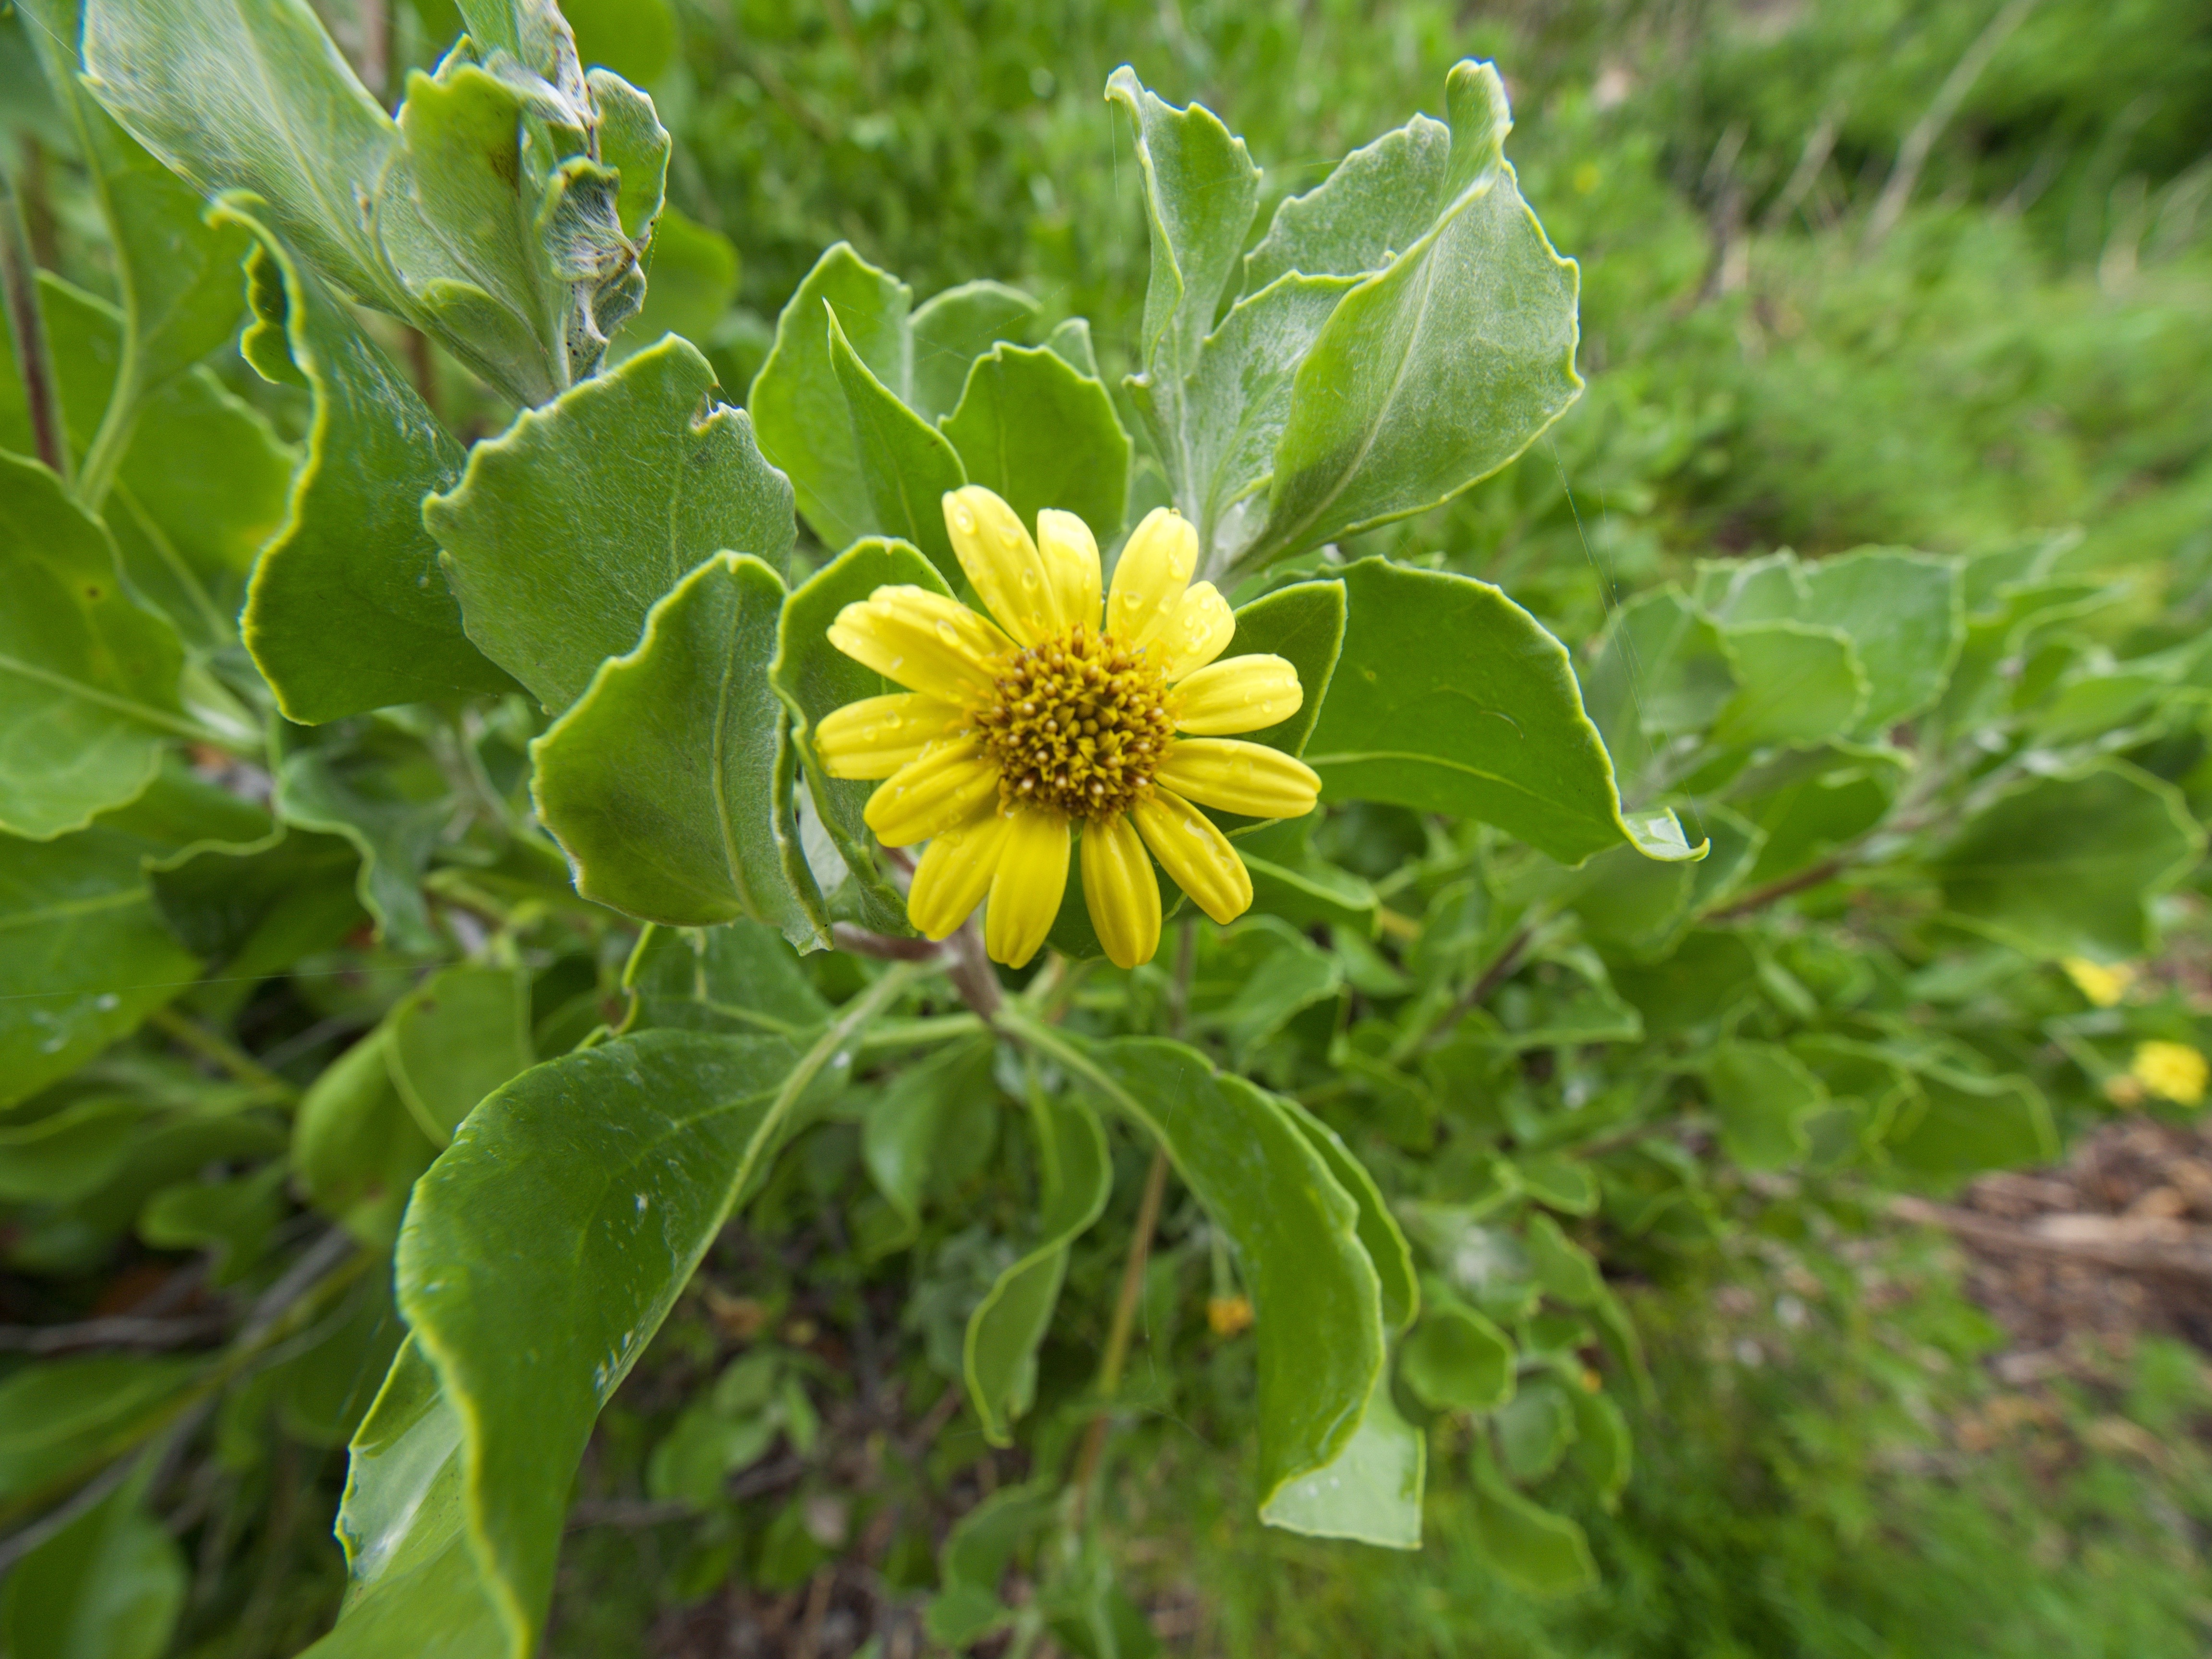 small yellow flower - looks like a daisy with thick fleshy leaves similar to succulents.